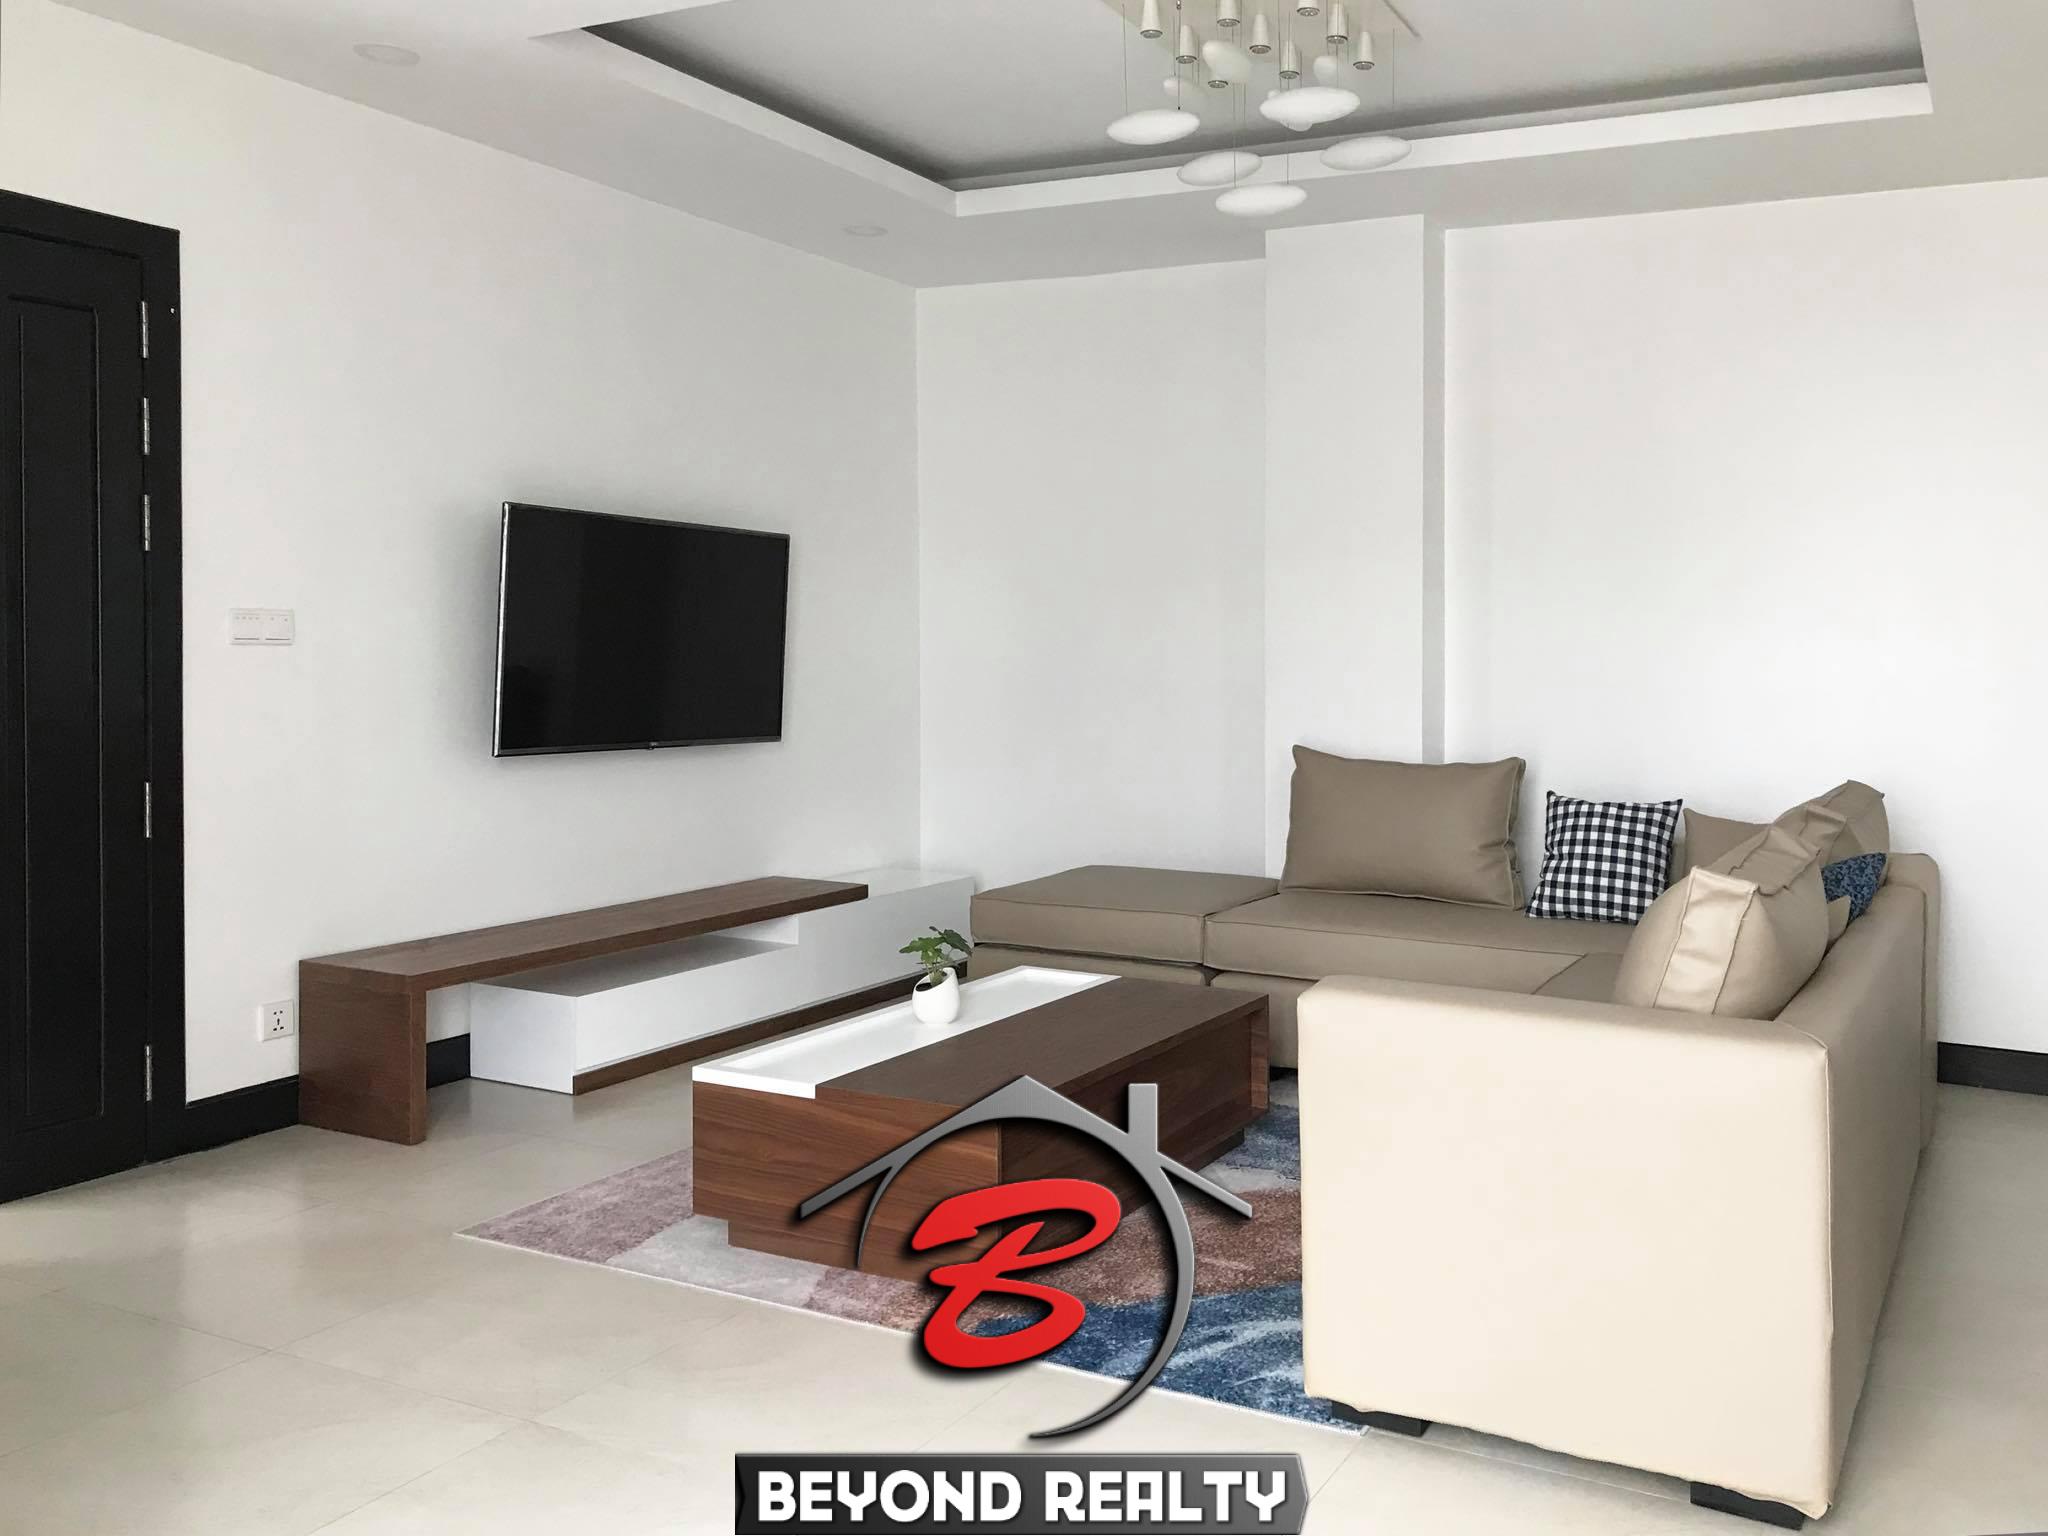 the living room of the 3br luxury serviced condo for rent in Sangkat Srah Chak in Daun Penh in Phnom Penh Cambodia